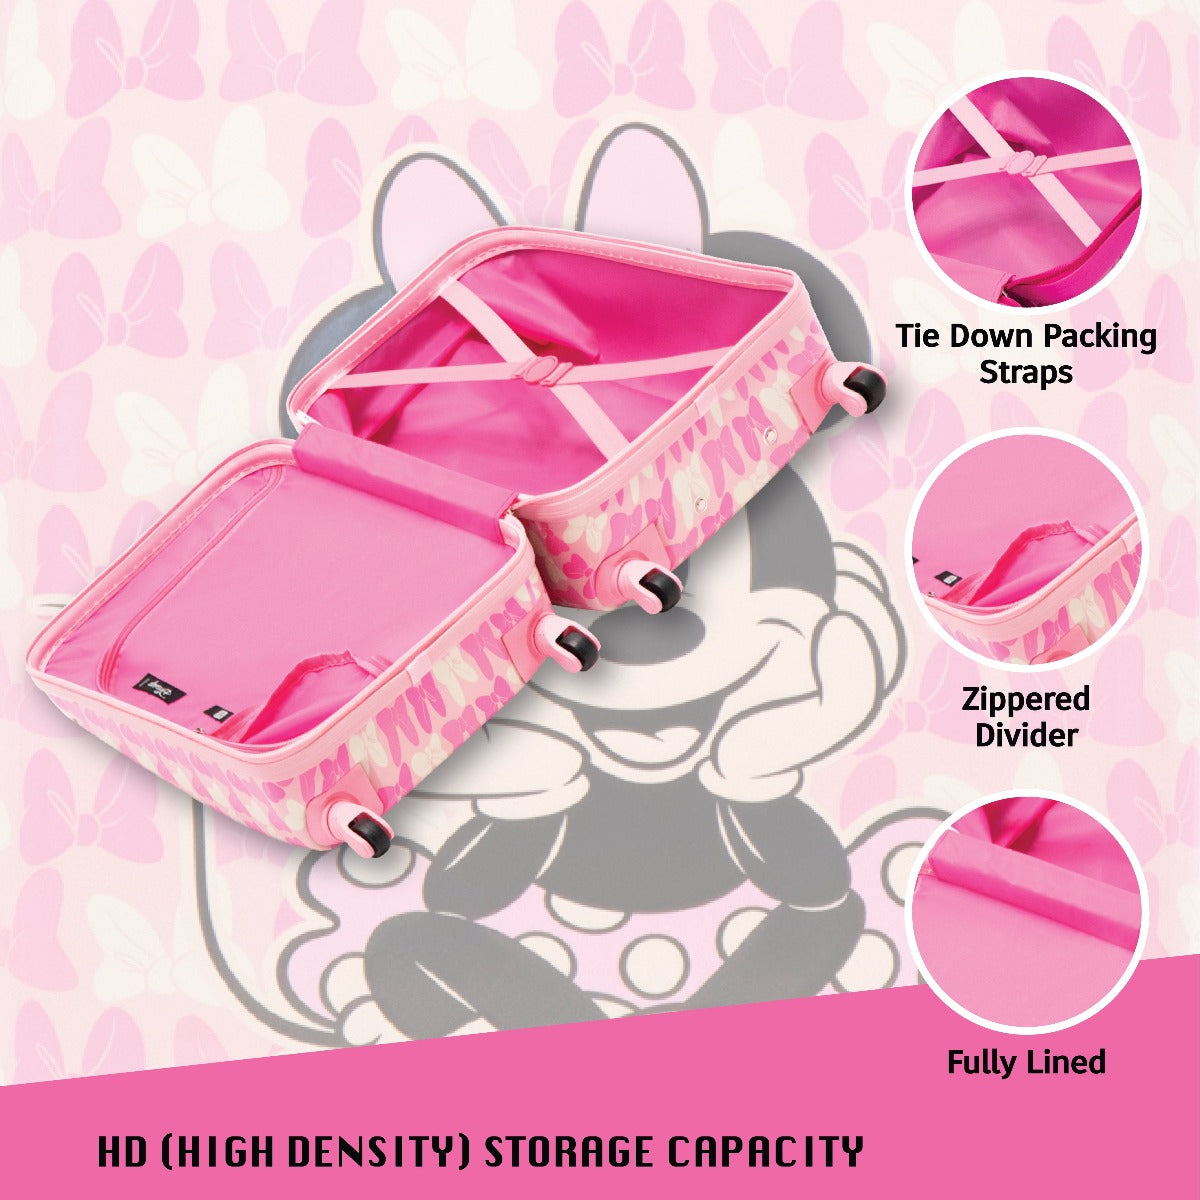 Disney Ful Minnie Mouse Bows Print Hardside Spinner Luggage - Pink 20.5 inch Kids Carry On Suitcases